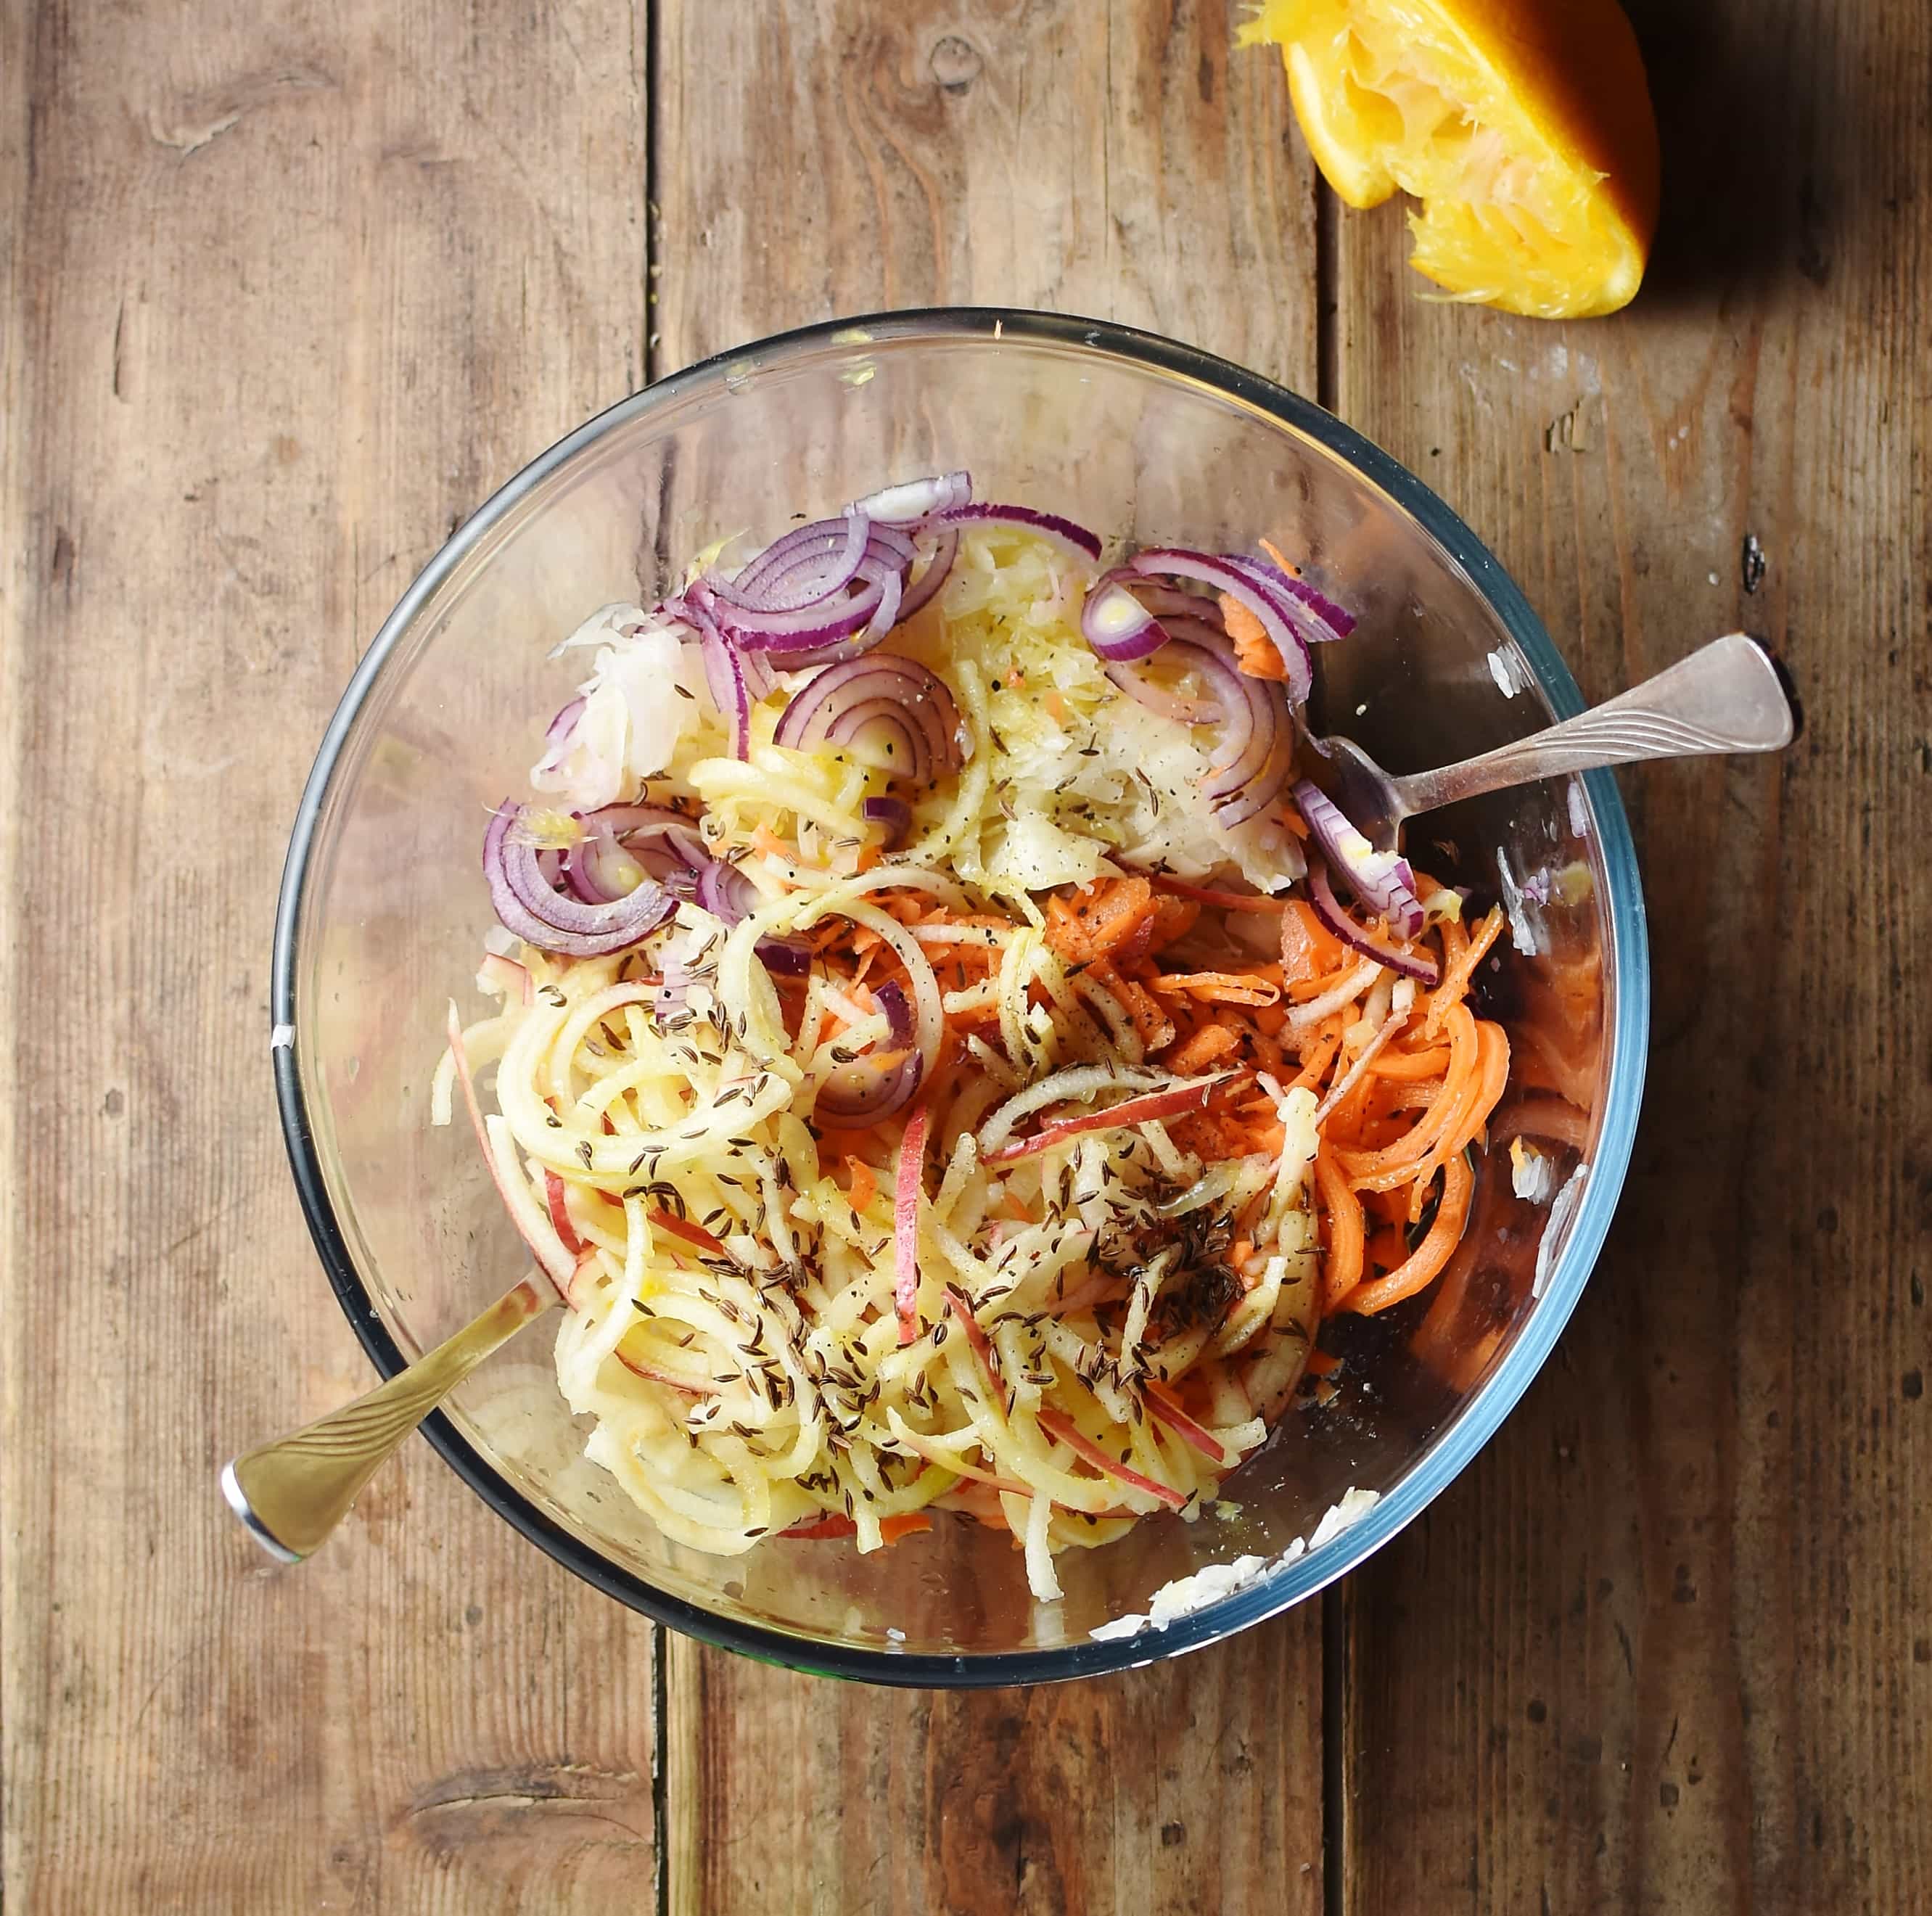 Spiralized carrot and apple, sliced red onion, spices and sauerkraut in mixing bowl with 2 forks.